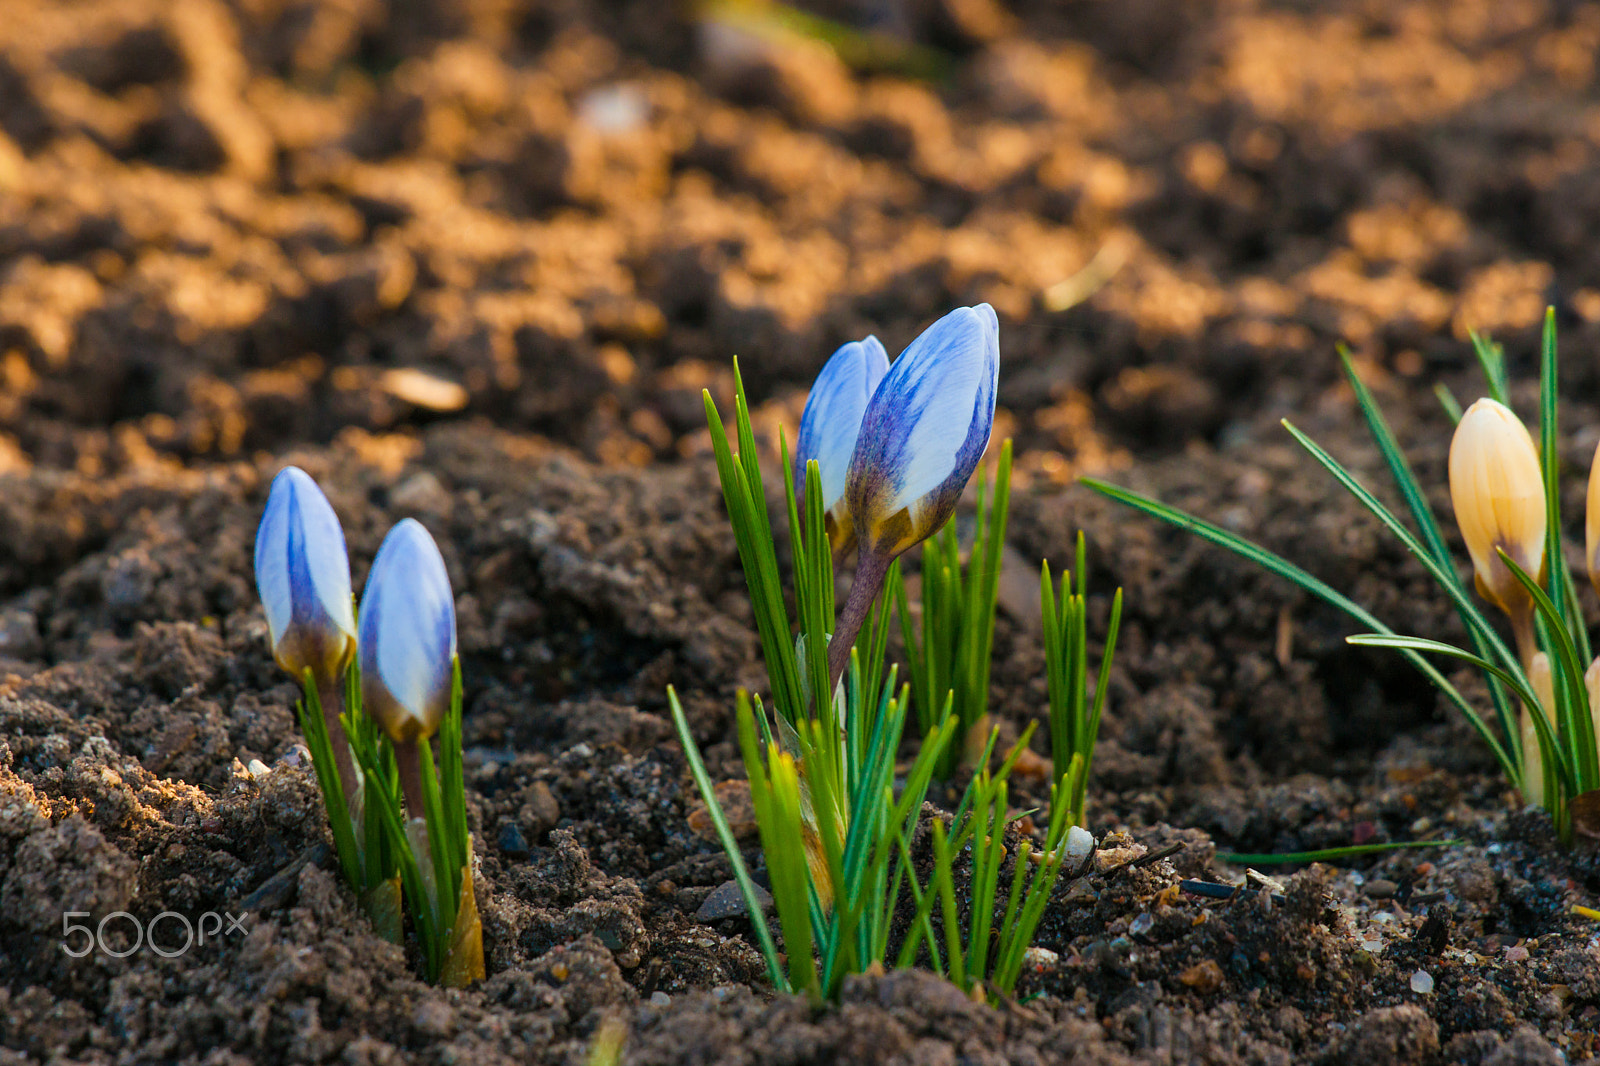 Sony Alpha DSLR-A900 sample photo. Crocus flowers blooming in a garden photography